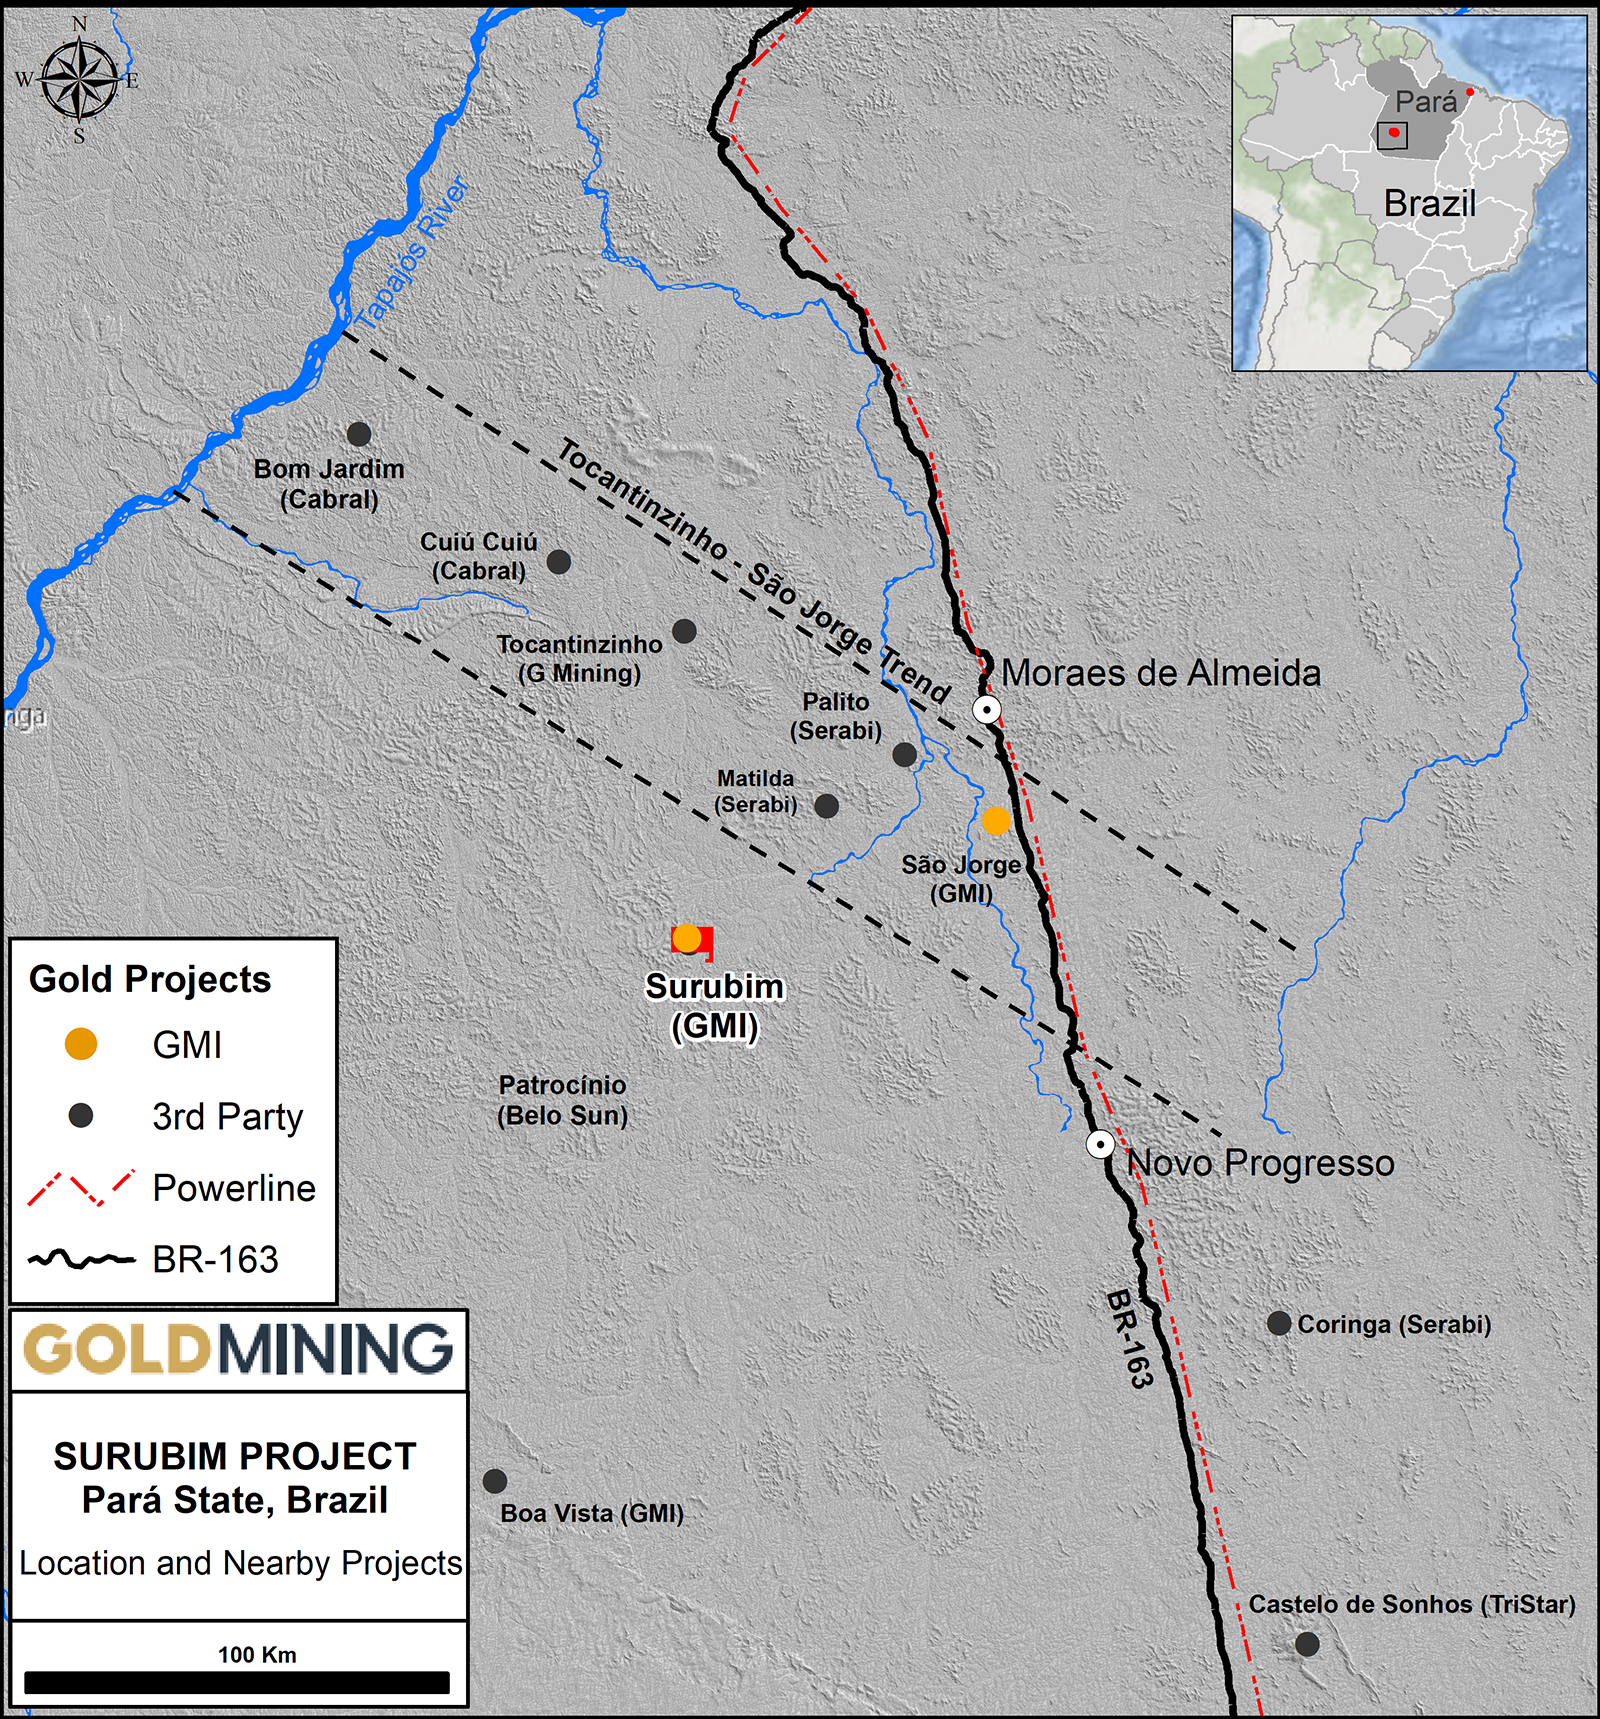 GoldMining - Surubim Gold Project Location and Nearby Projects